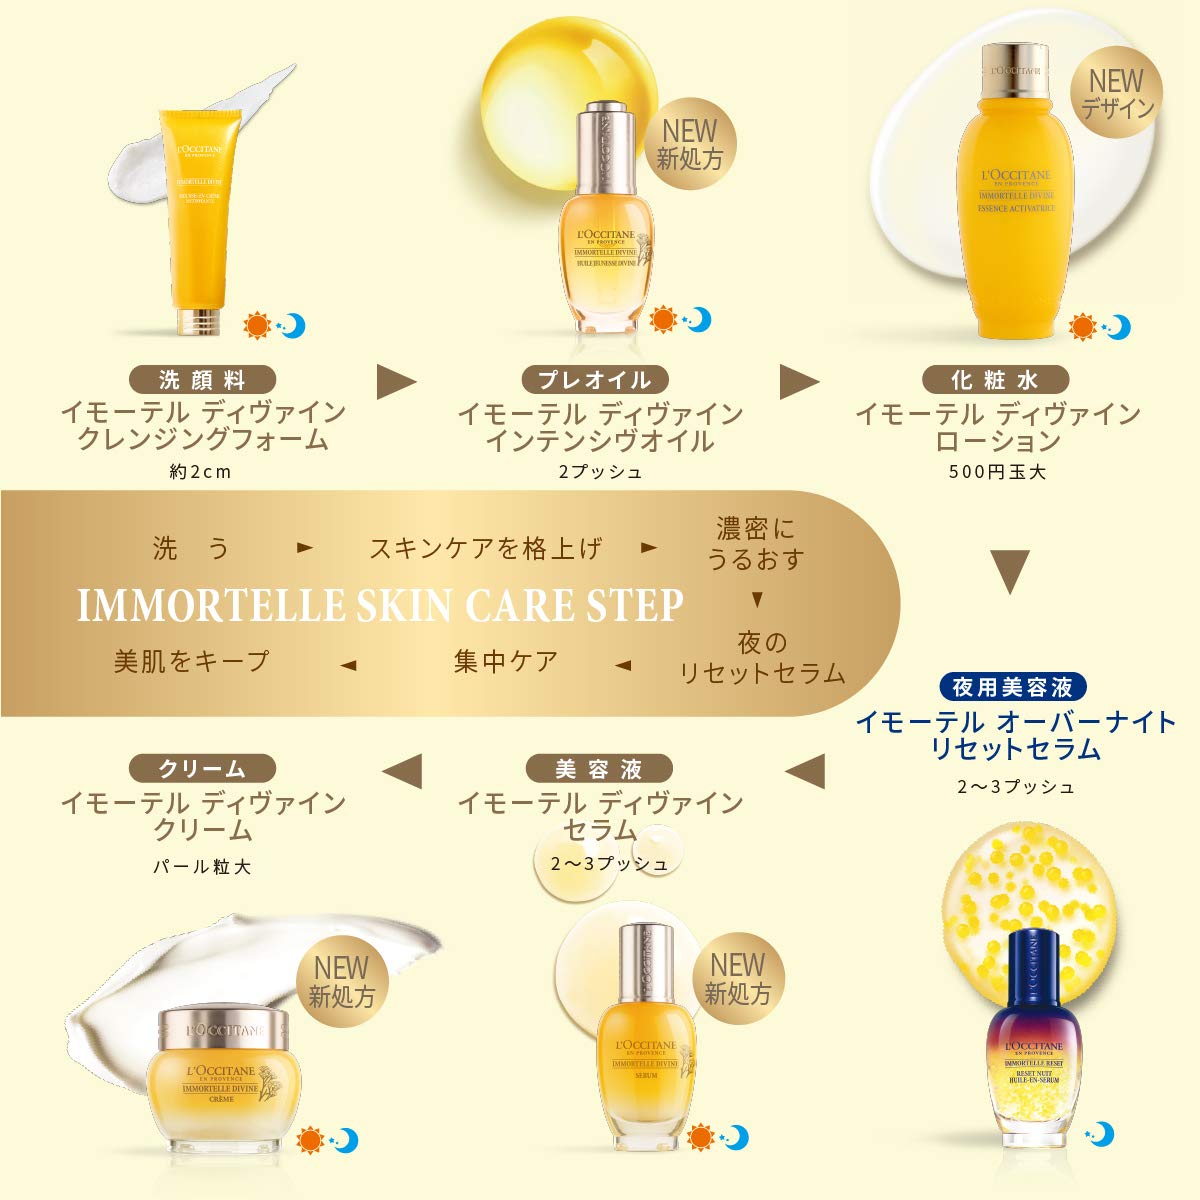 L'Occitane Anti-Aging Immortelle Divine Face Serum for a Youthful and Radiant Glow, 1 fl. oz.